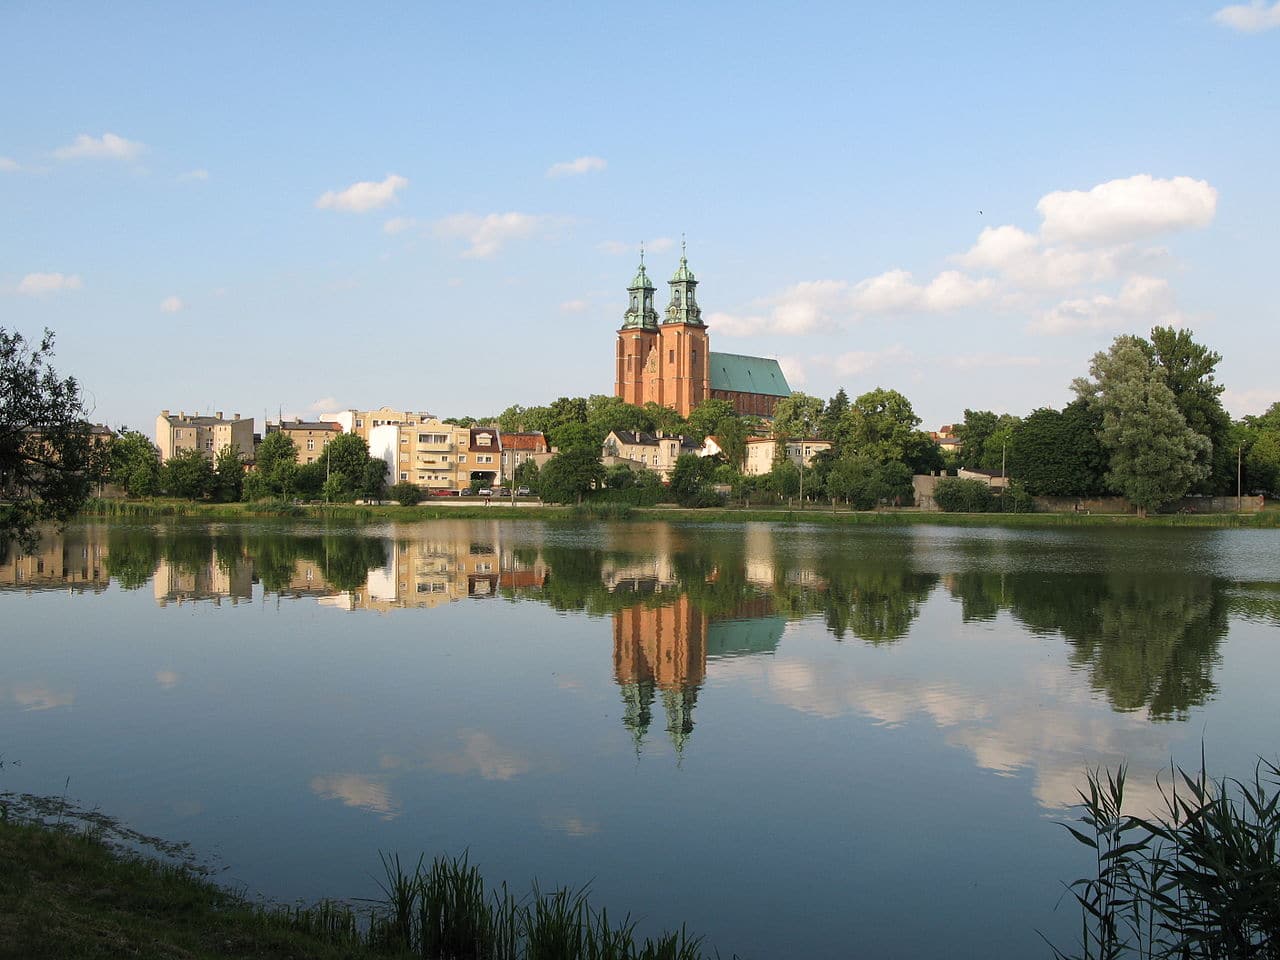 View of Gniezno, Poland, across the lake.